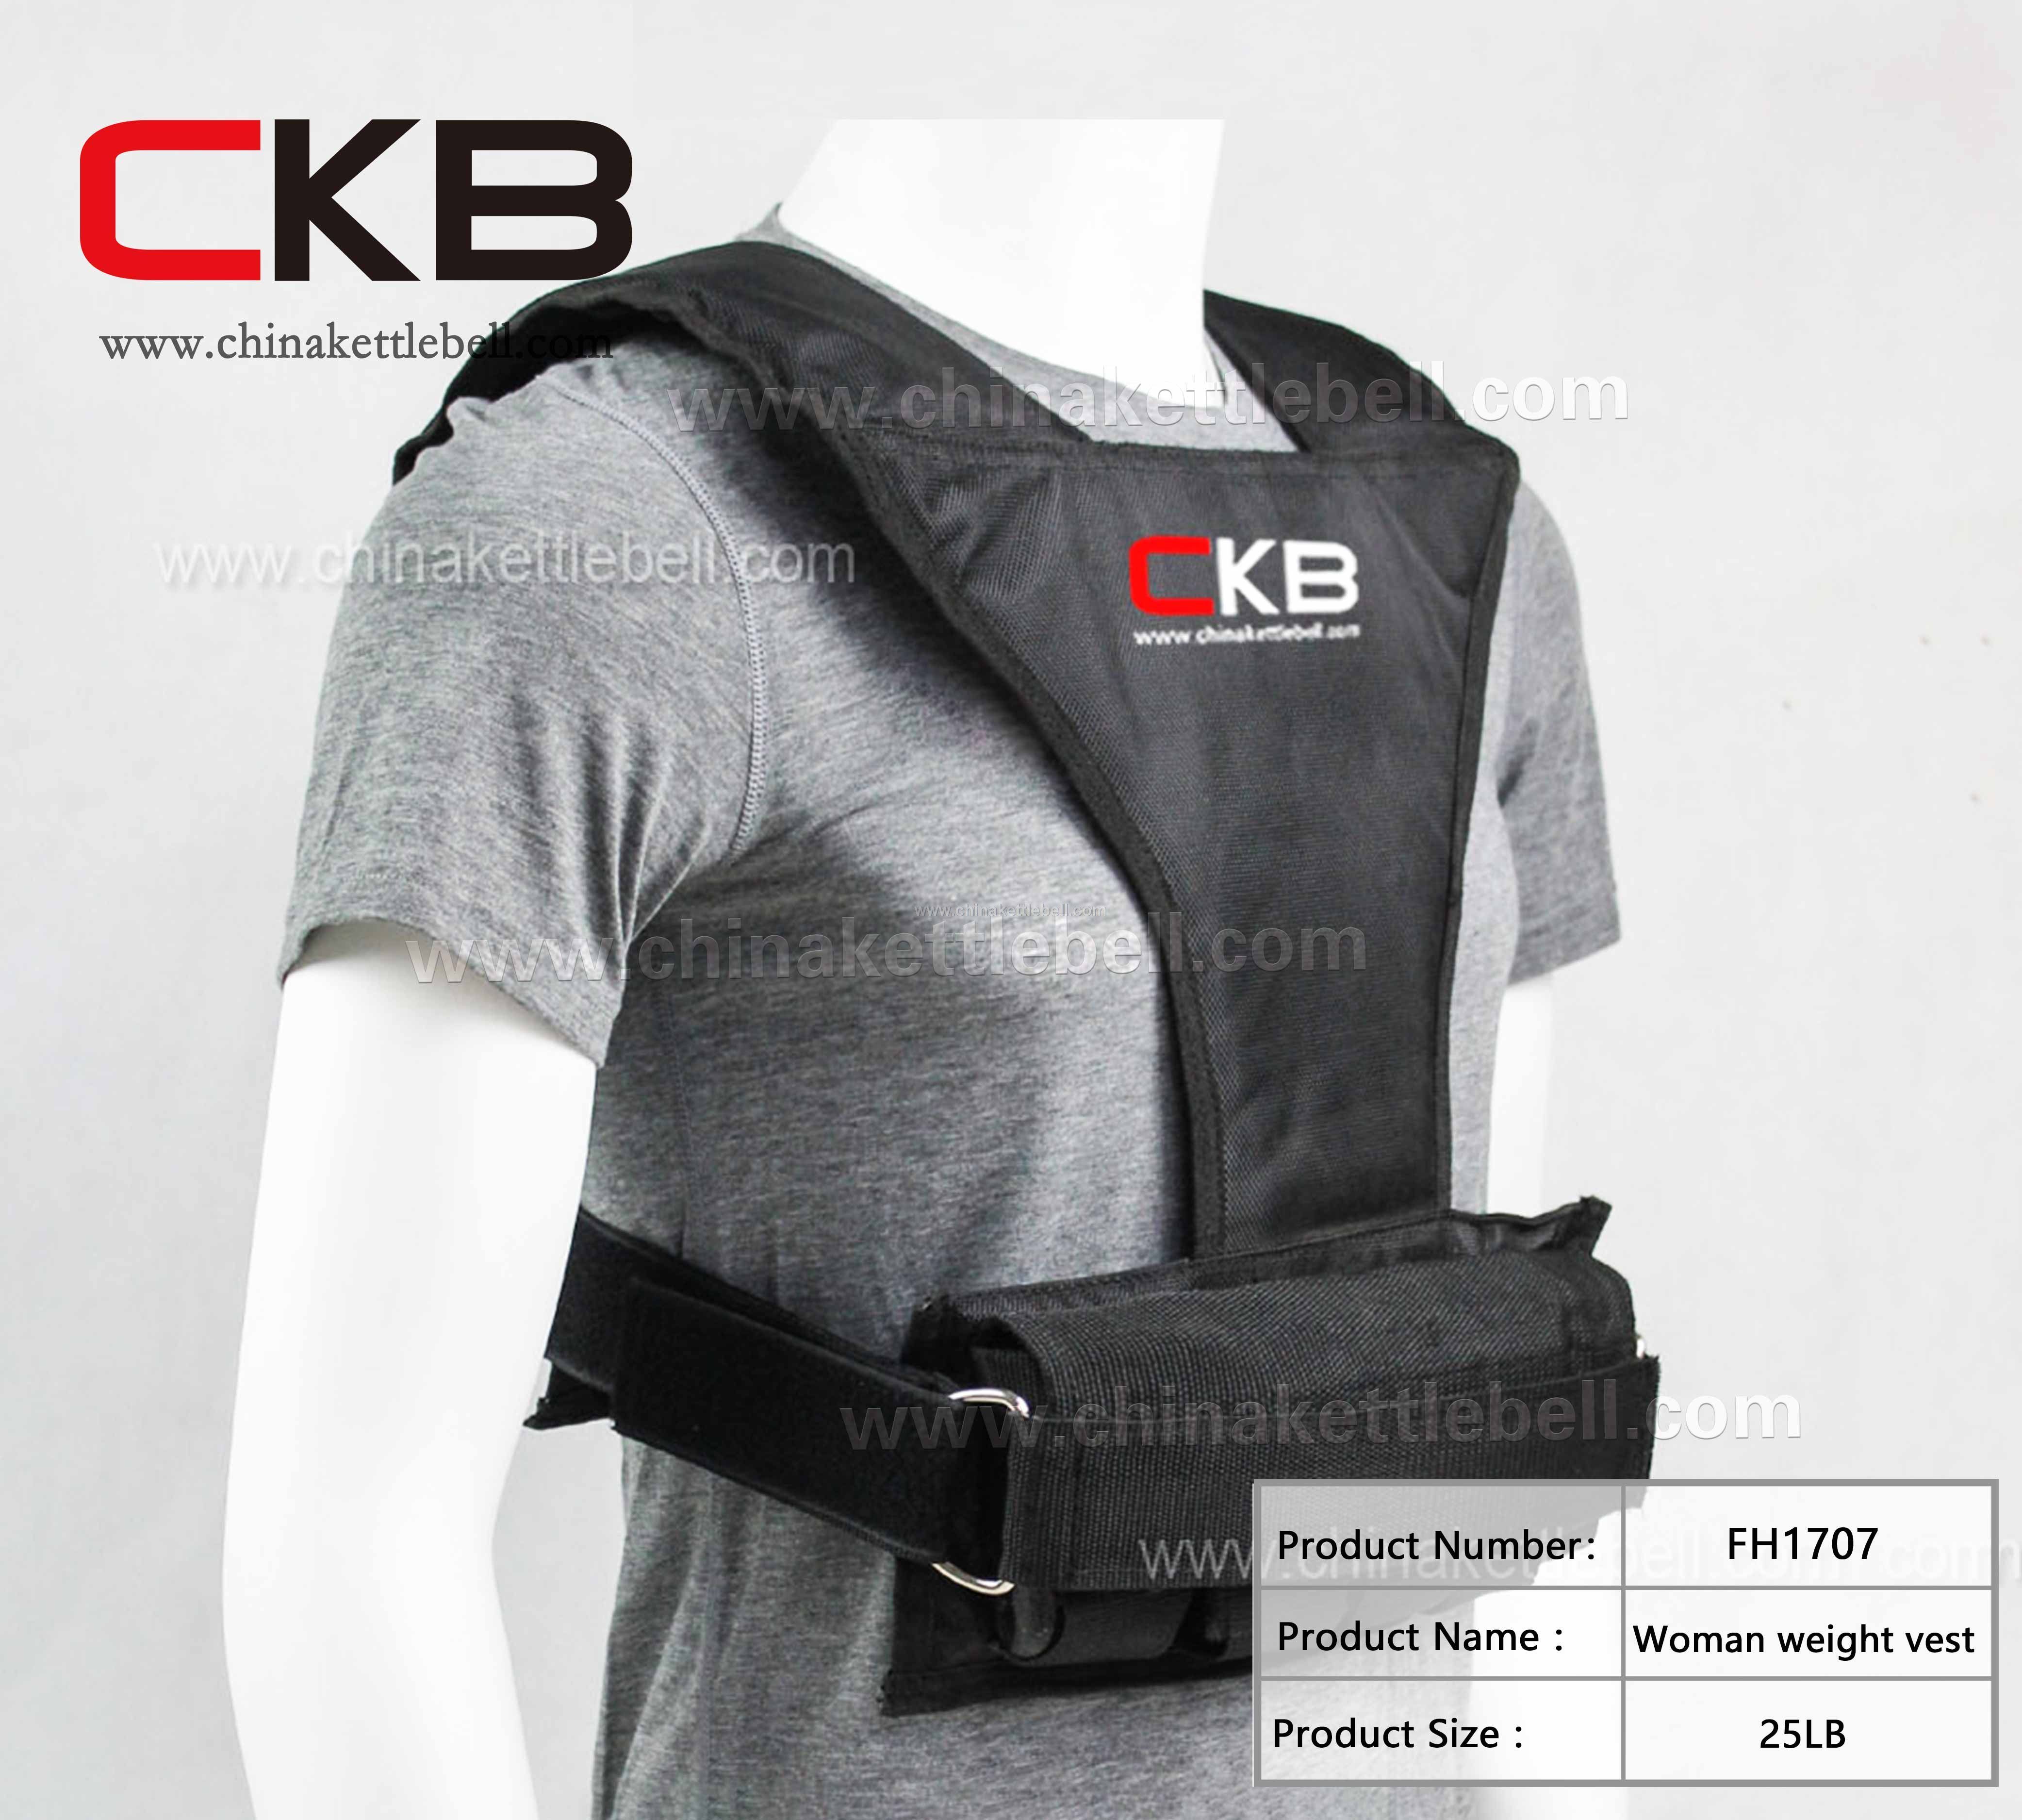 Woman weight vest